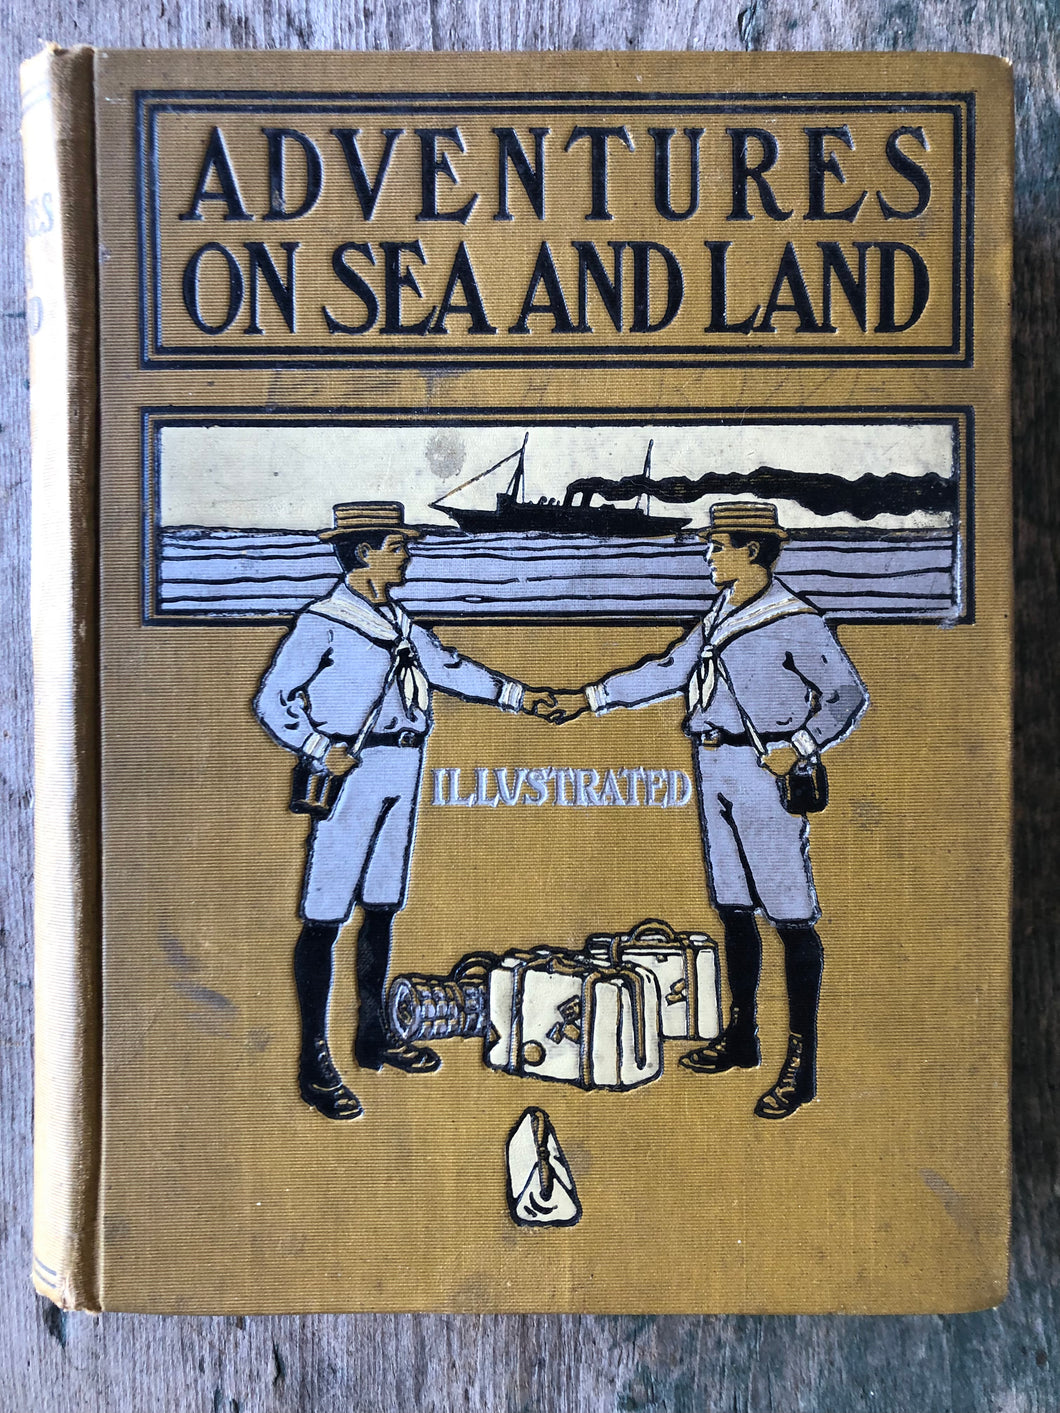 Adventures on Sea and Land: The Travels at Home and Abroad of Three Young Explorers. by Ella H. Stratton